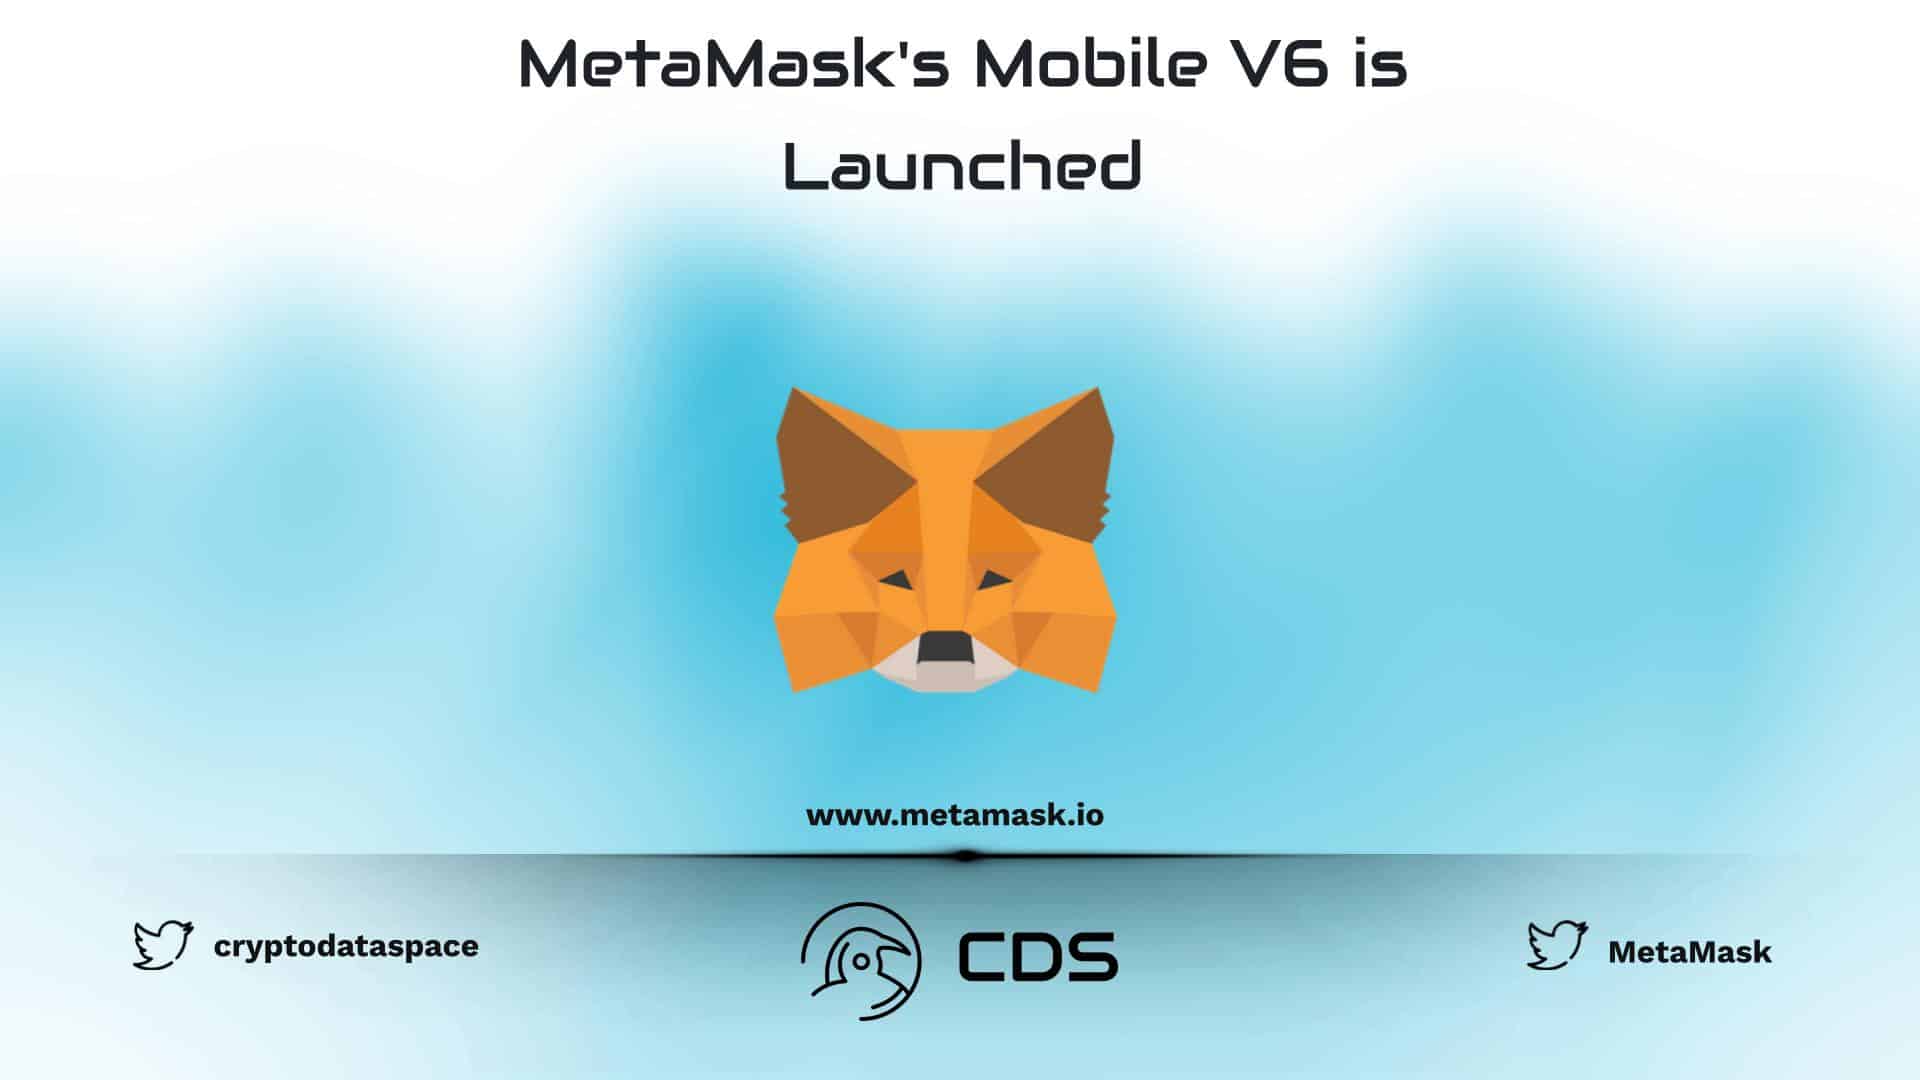 MetaMask's Mobile V6 is Launched